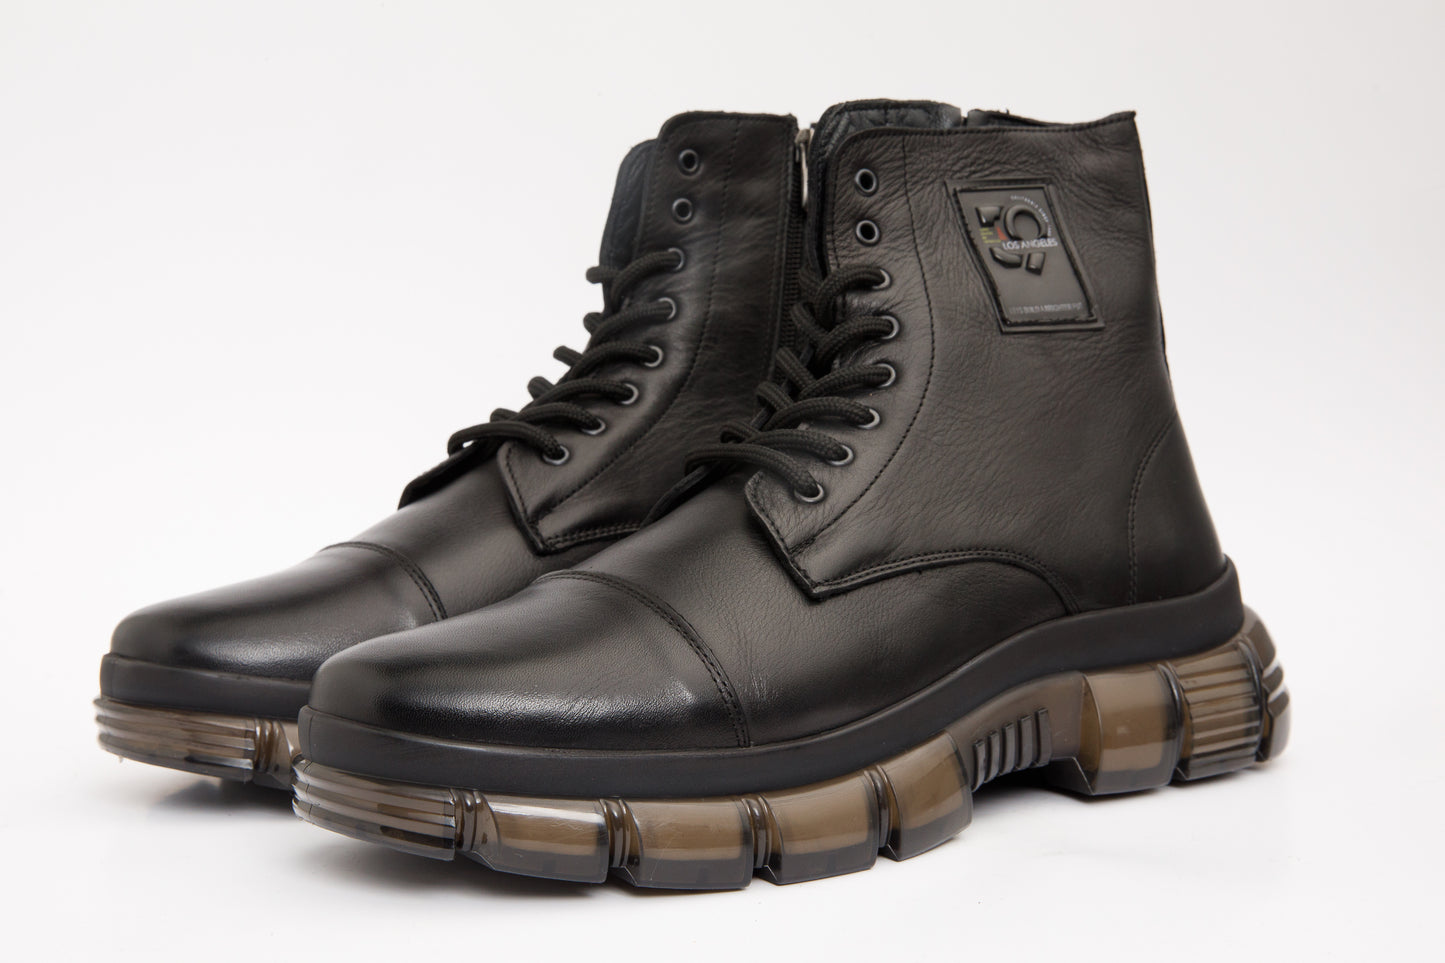 The Ottova Black Leather Lace-Up Sneaker Men Boot with a Zipper